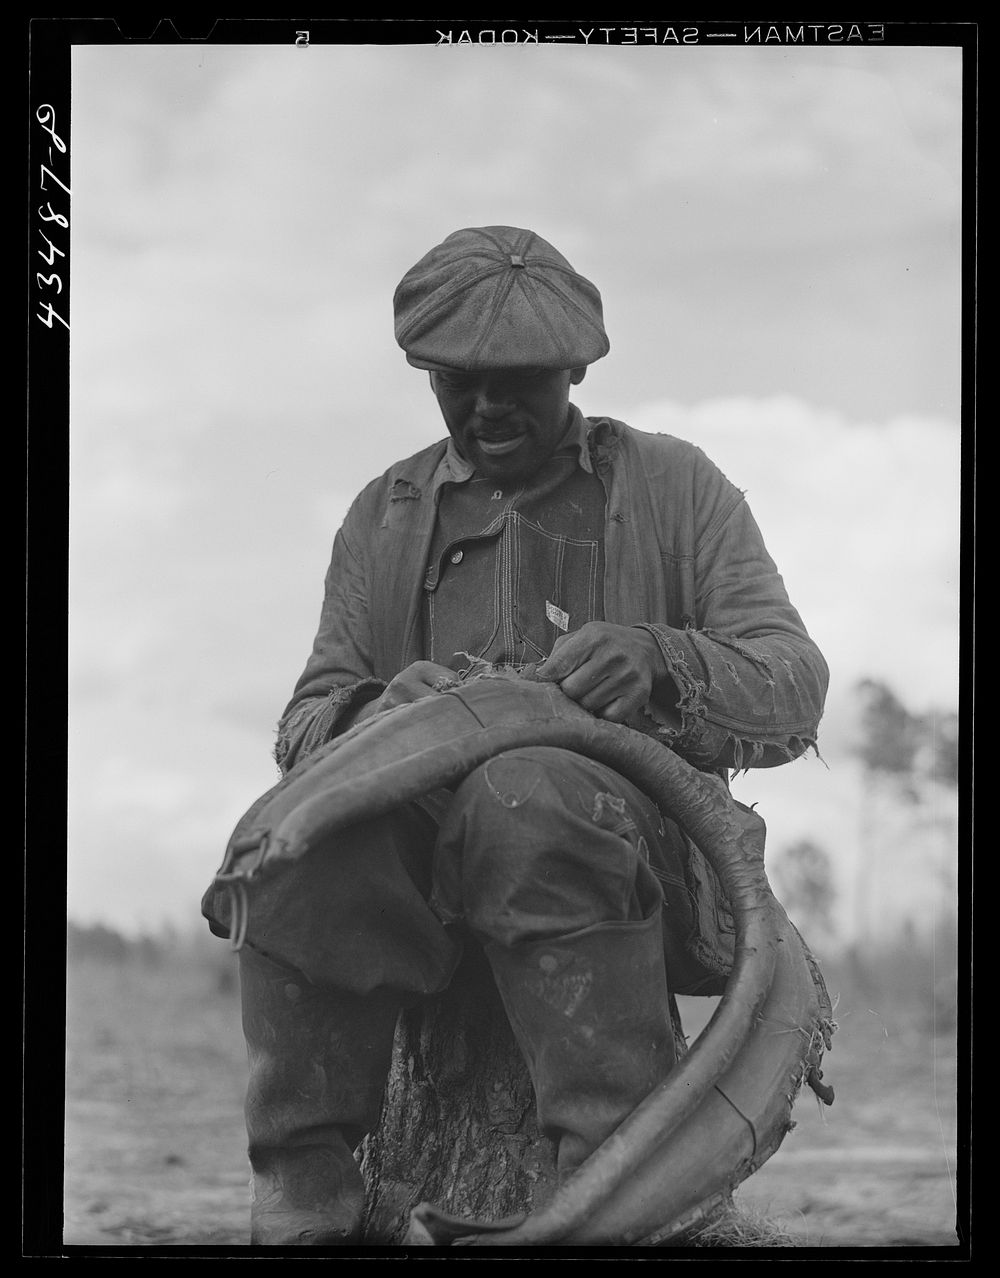 Repairing a mule harness on a farm near Moncks Corner, South Carolina. Sourced from the Library of Congress.